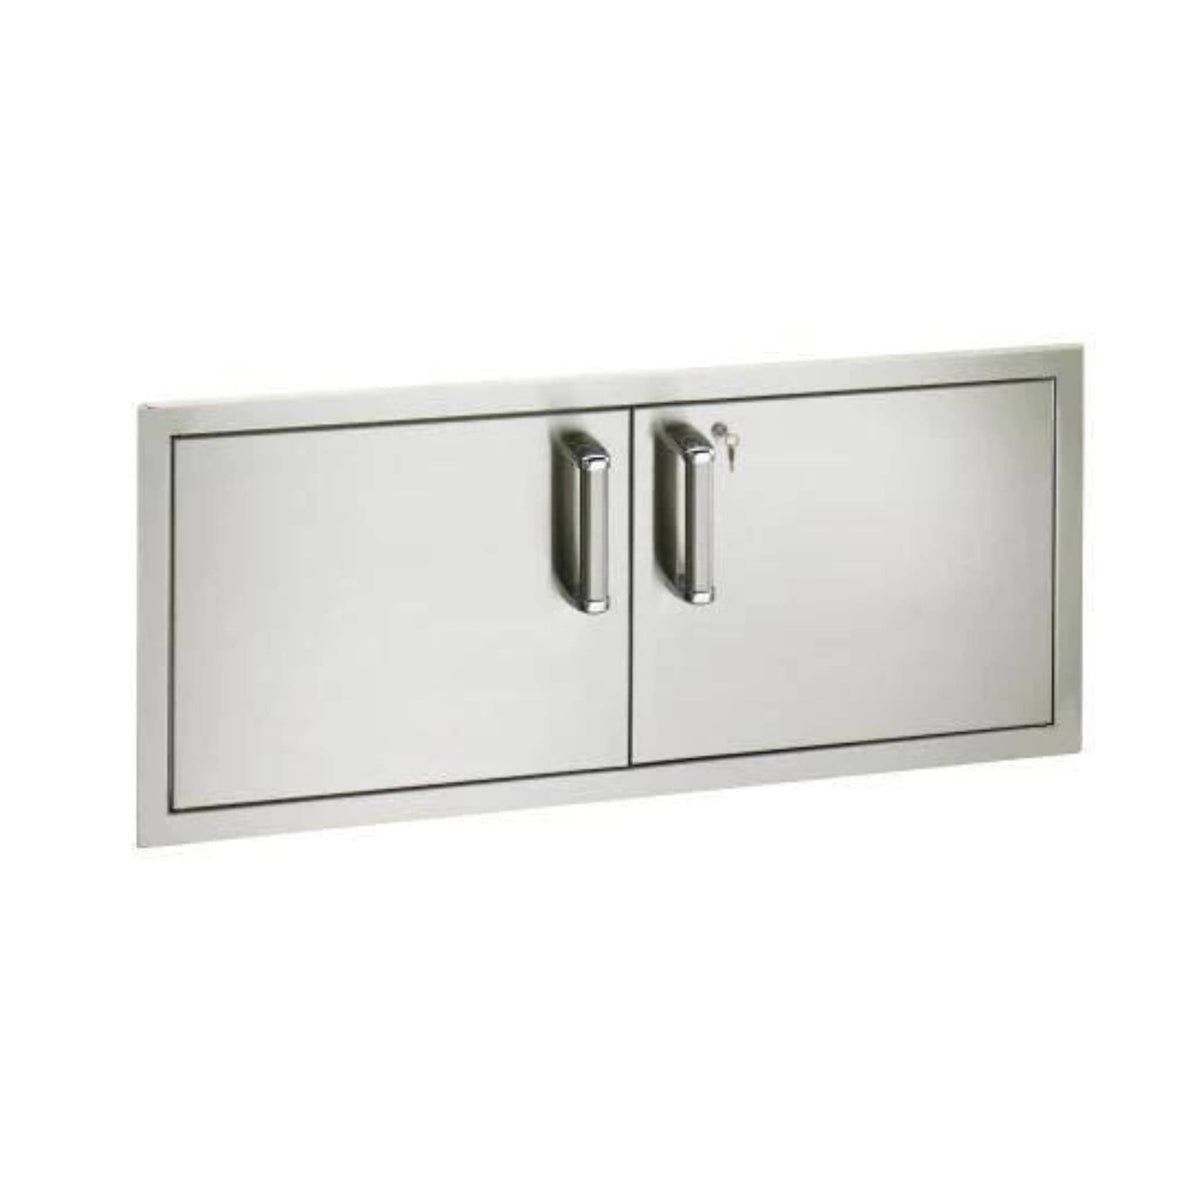 Fire Magic Double Access Doors (Reduced Height) Locking Model 53938KSC